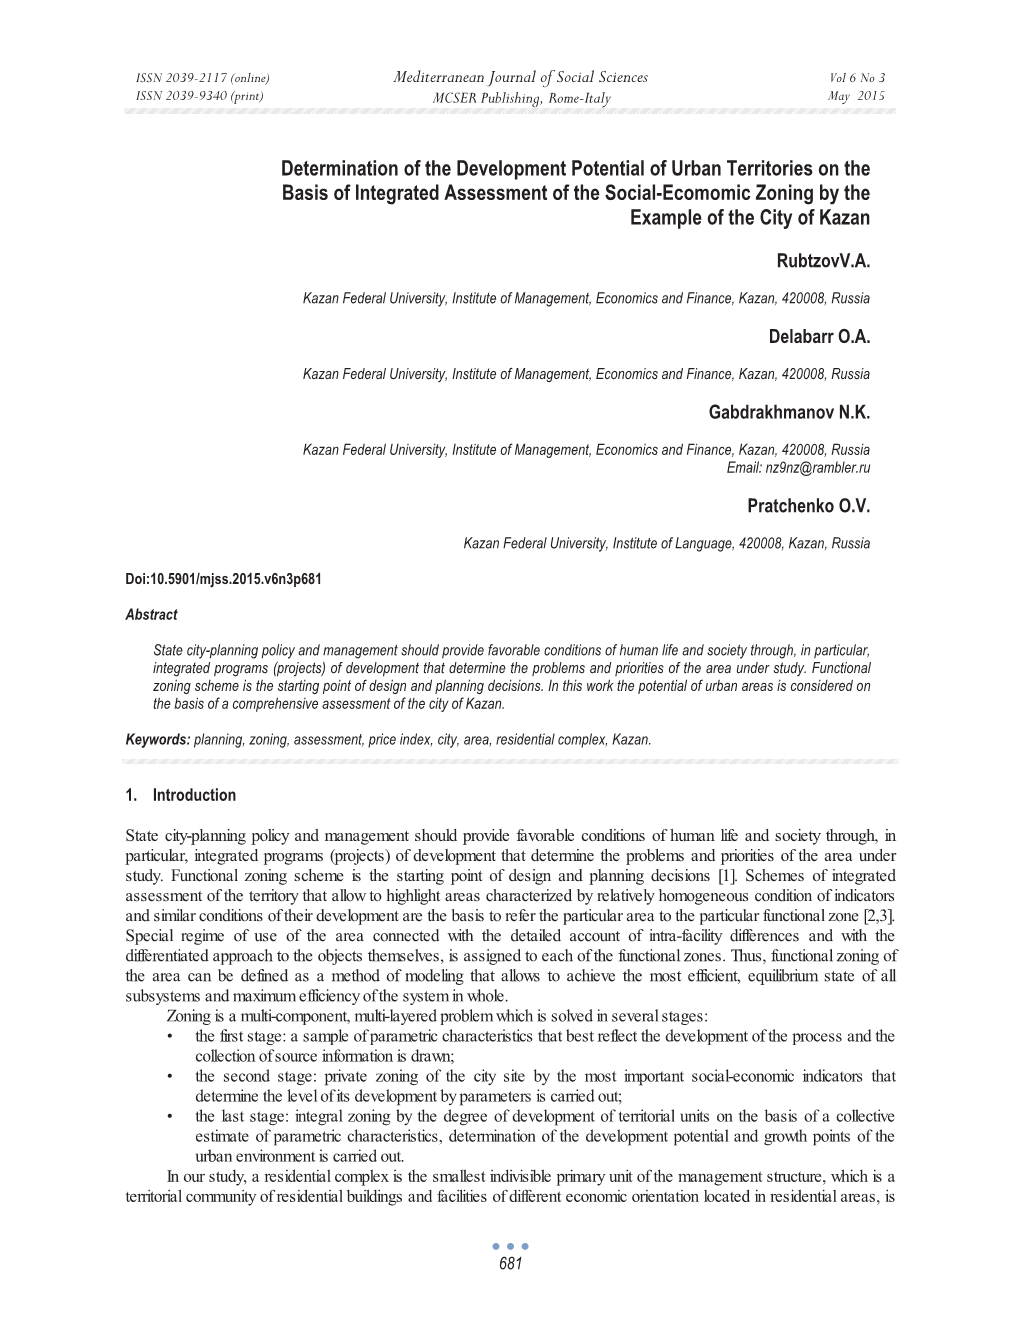 Determination of the Development Potential of Urban Territories on The